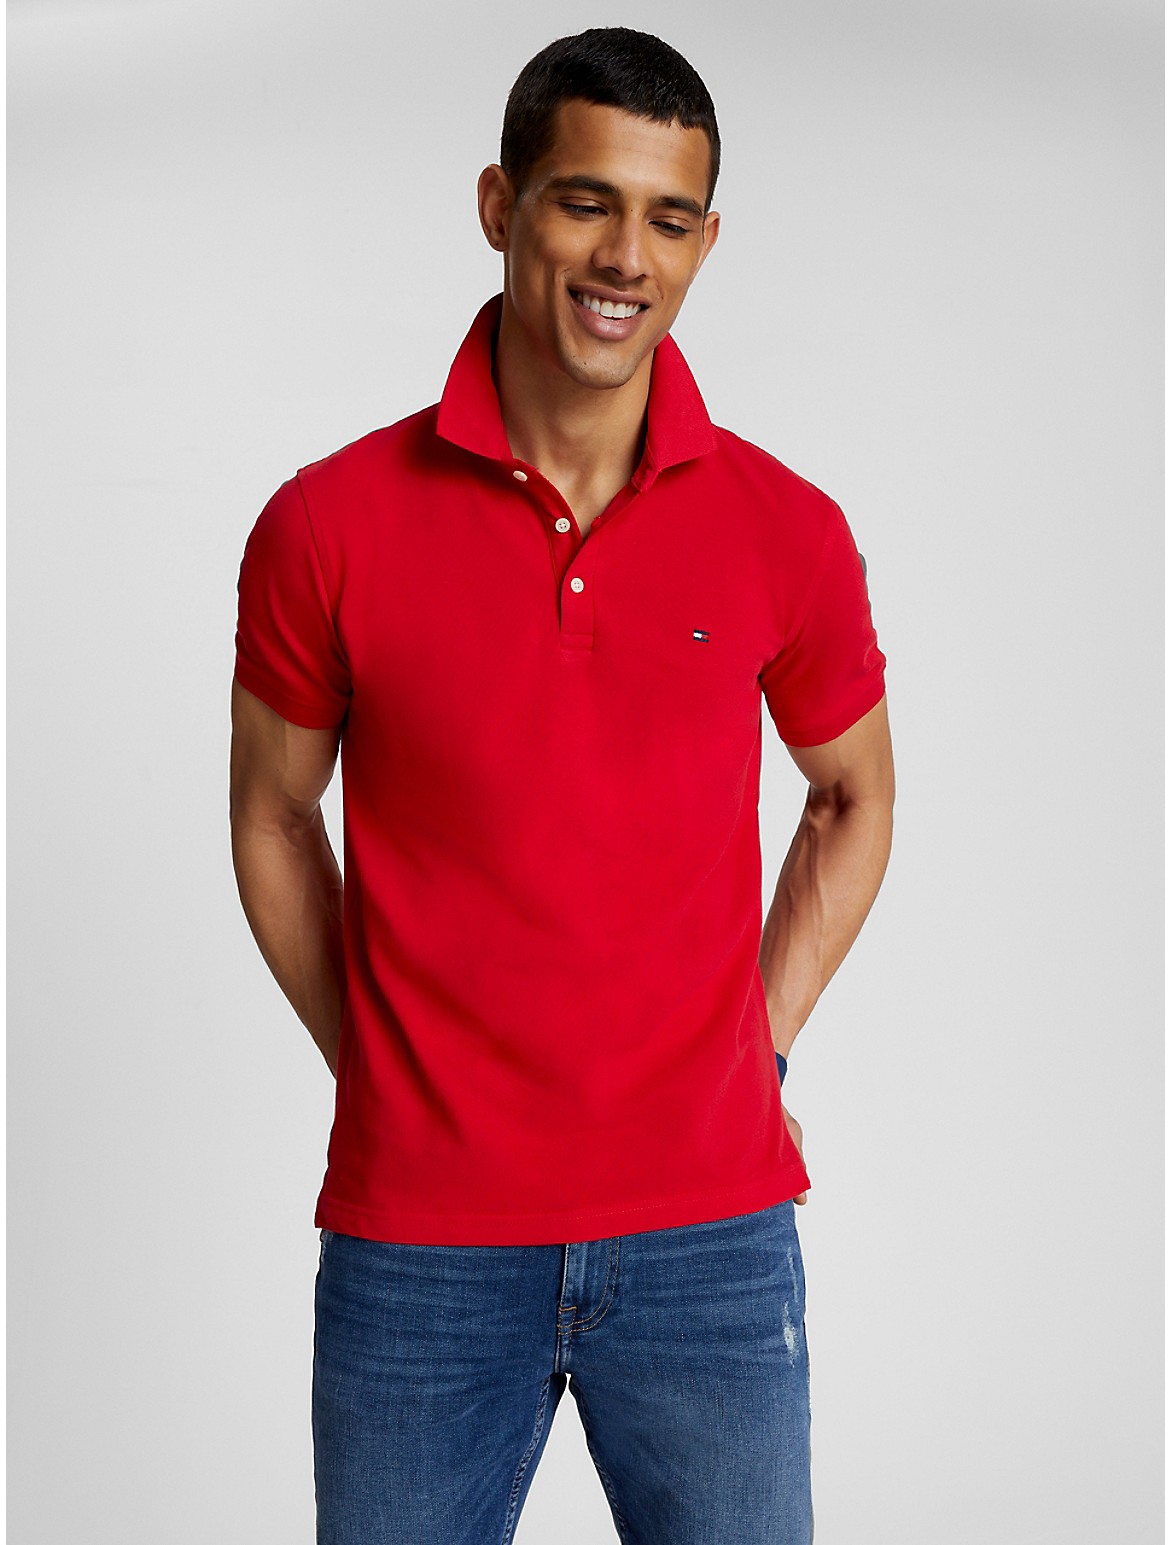 Tommy Hilfiger Men's Slim Fit Tommy Polo - Red - M